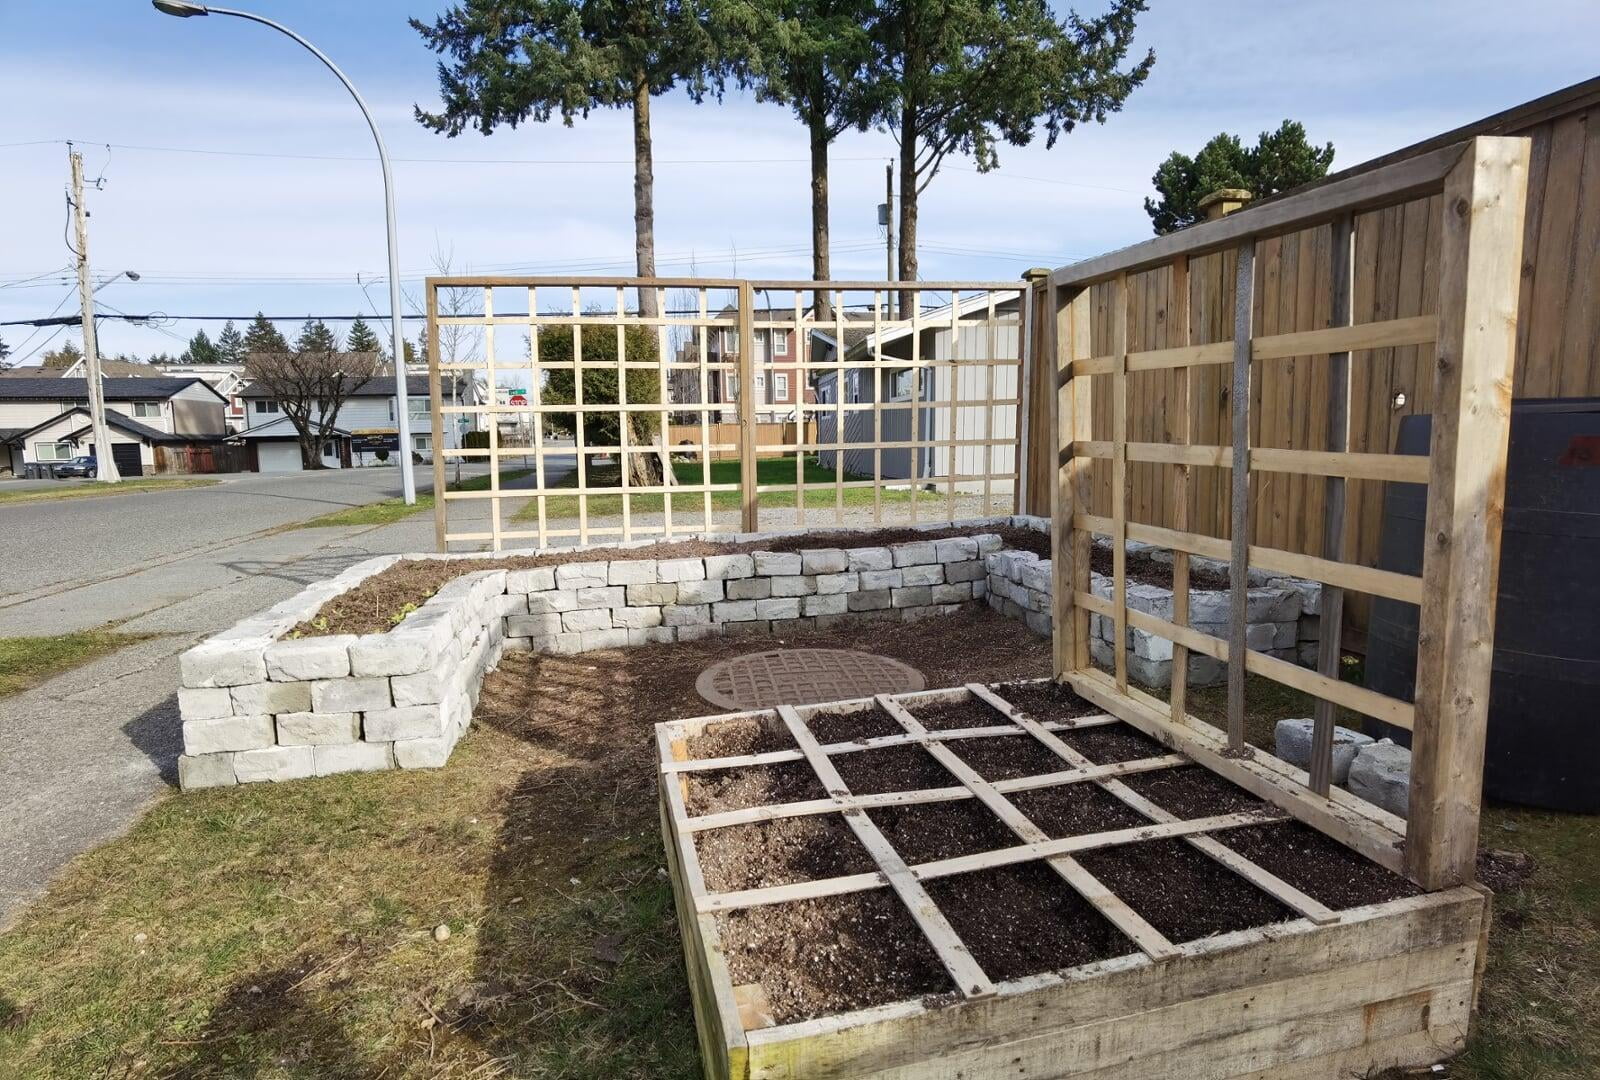 Building a Community Vegetable Garden from Upcycling - Pallet wood & concrete bricks